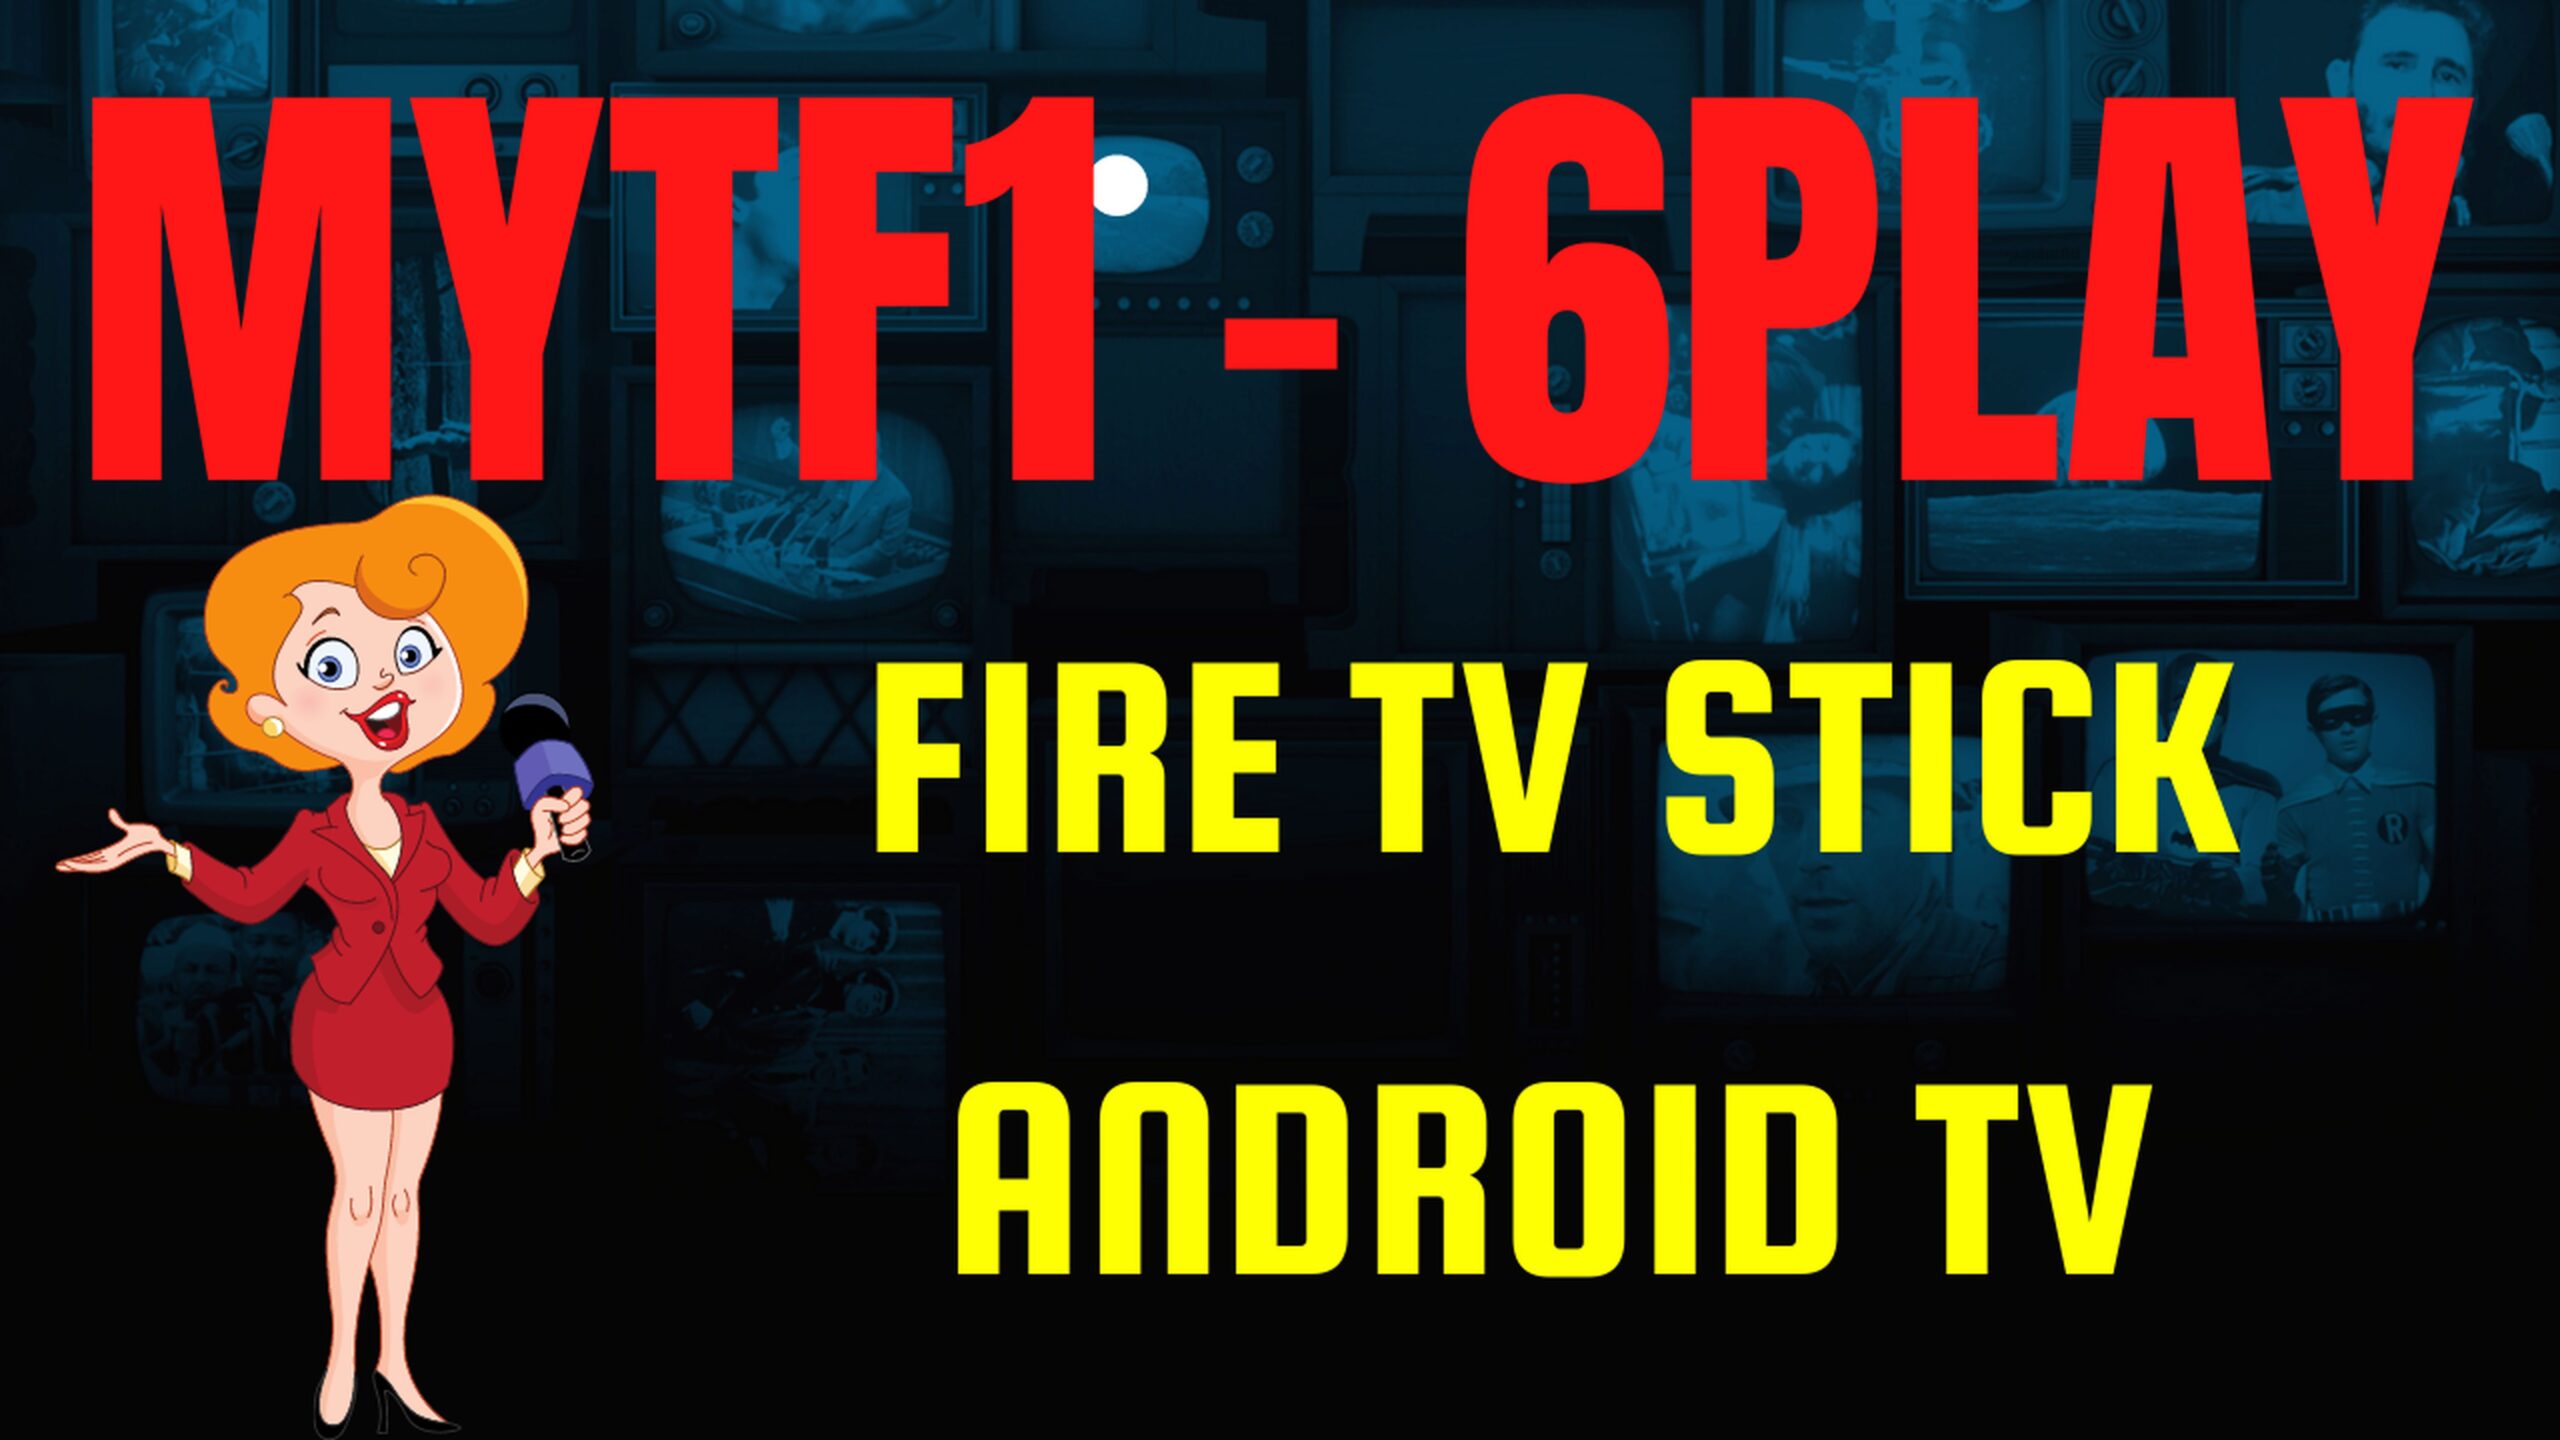 Installer MyTF1 et 6Play (Direct - Replay) sur Fire TV Stick / Android TV 18